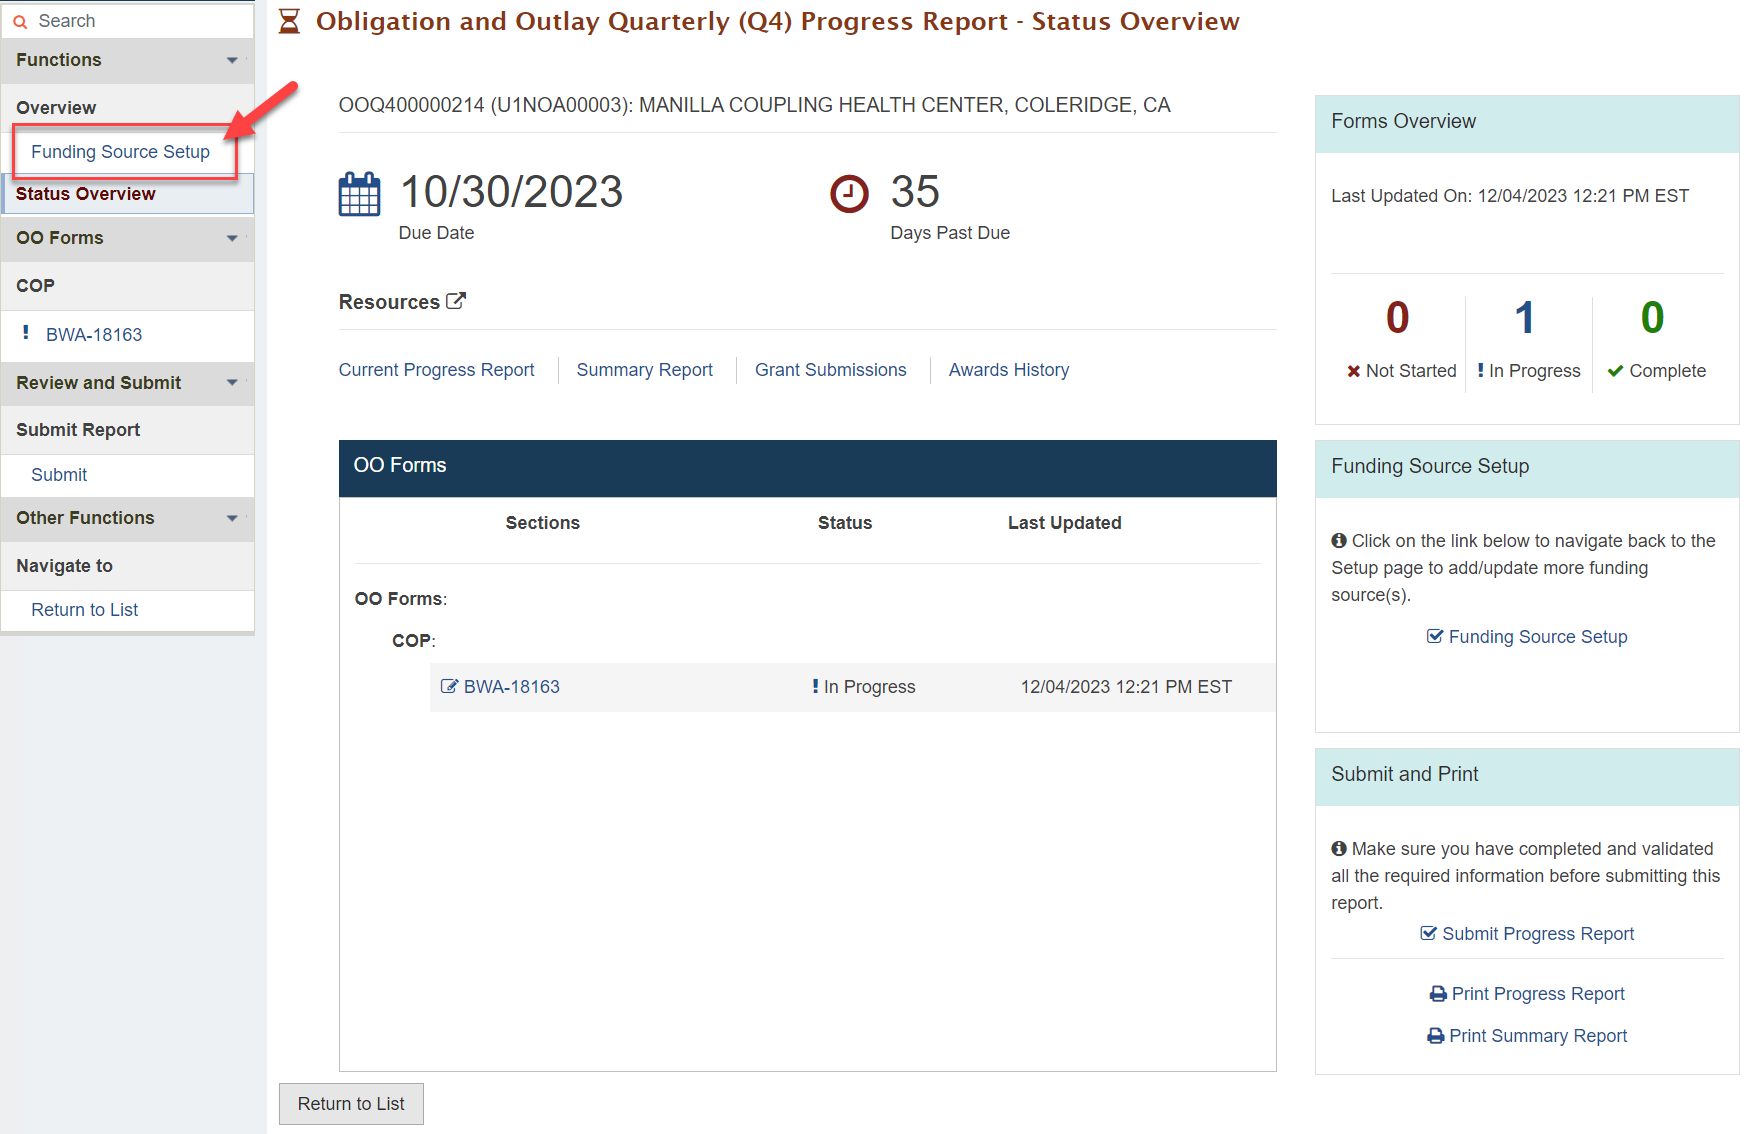 Screenshot of the Obligation and Outlay Quarterly Progress Report Status Overview page showing the Funding Source Setup option